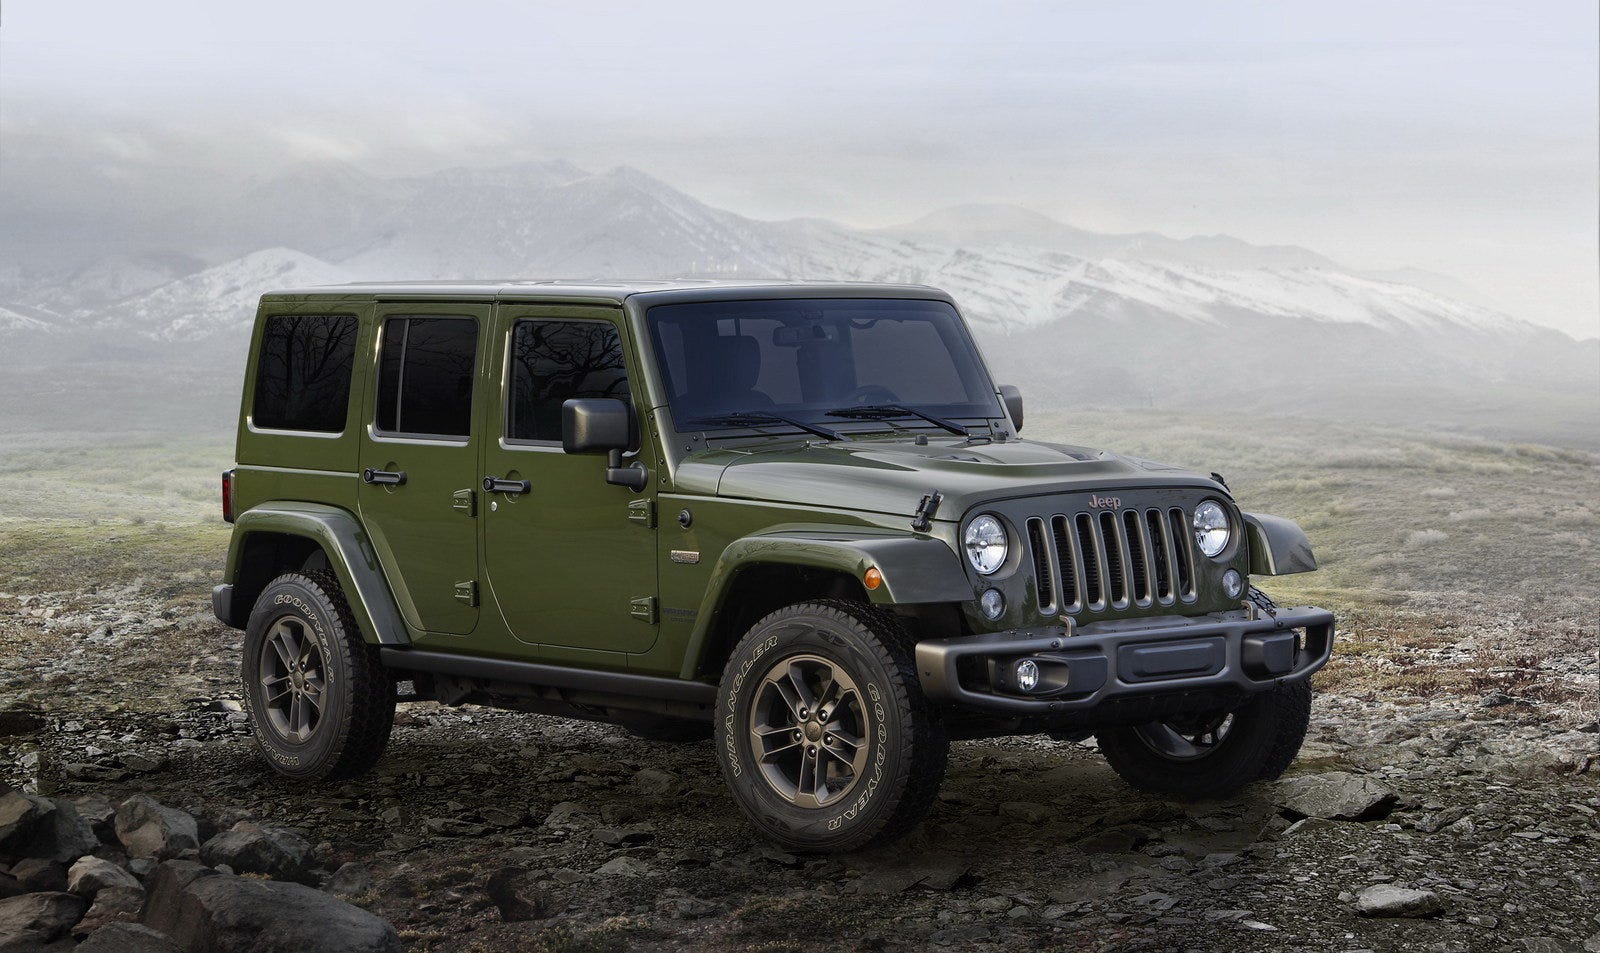 Test Drive: 75th Anniversary Jeep Wrangler Unlimited 4x4